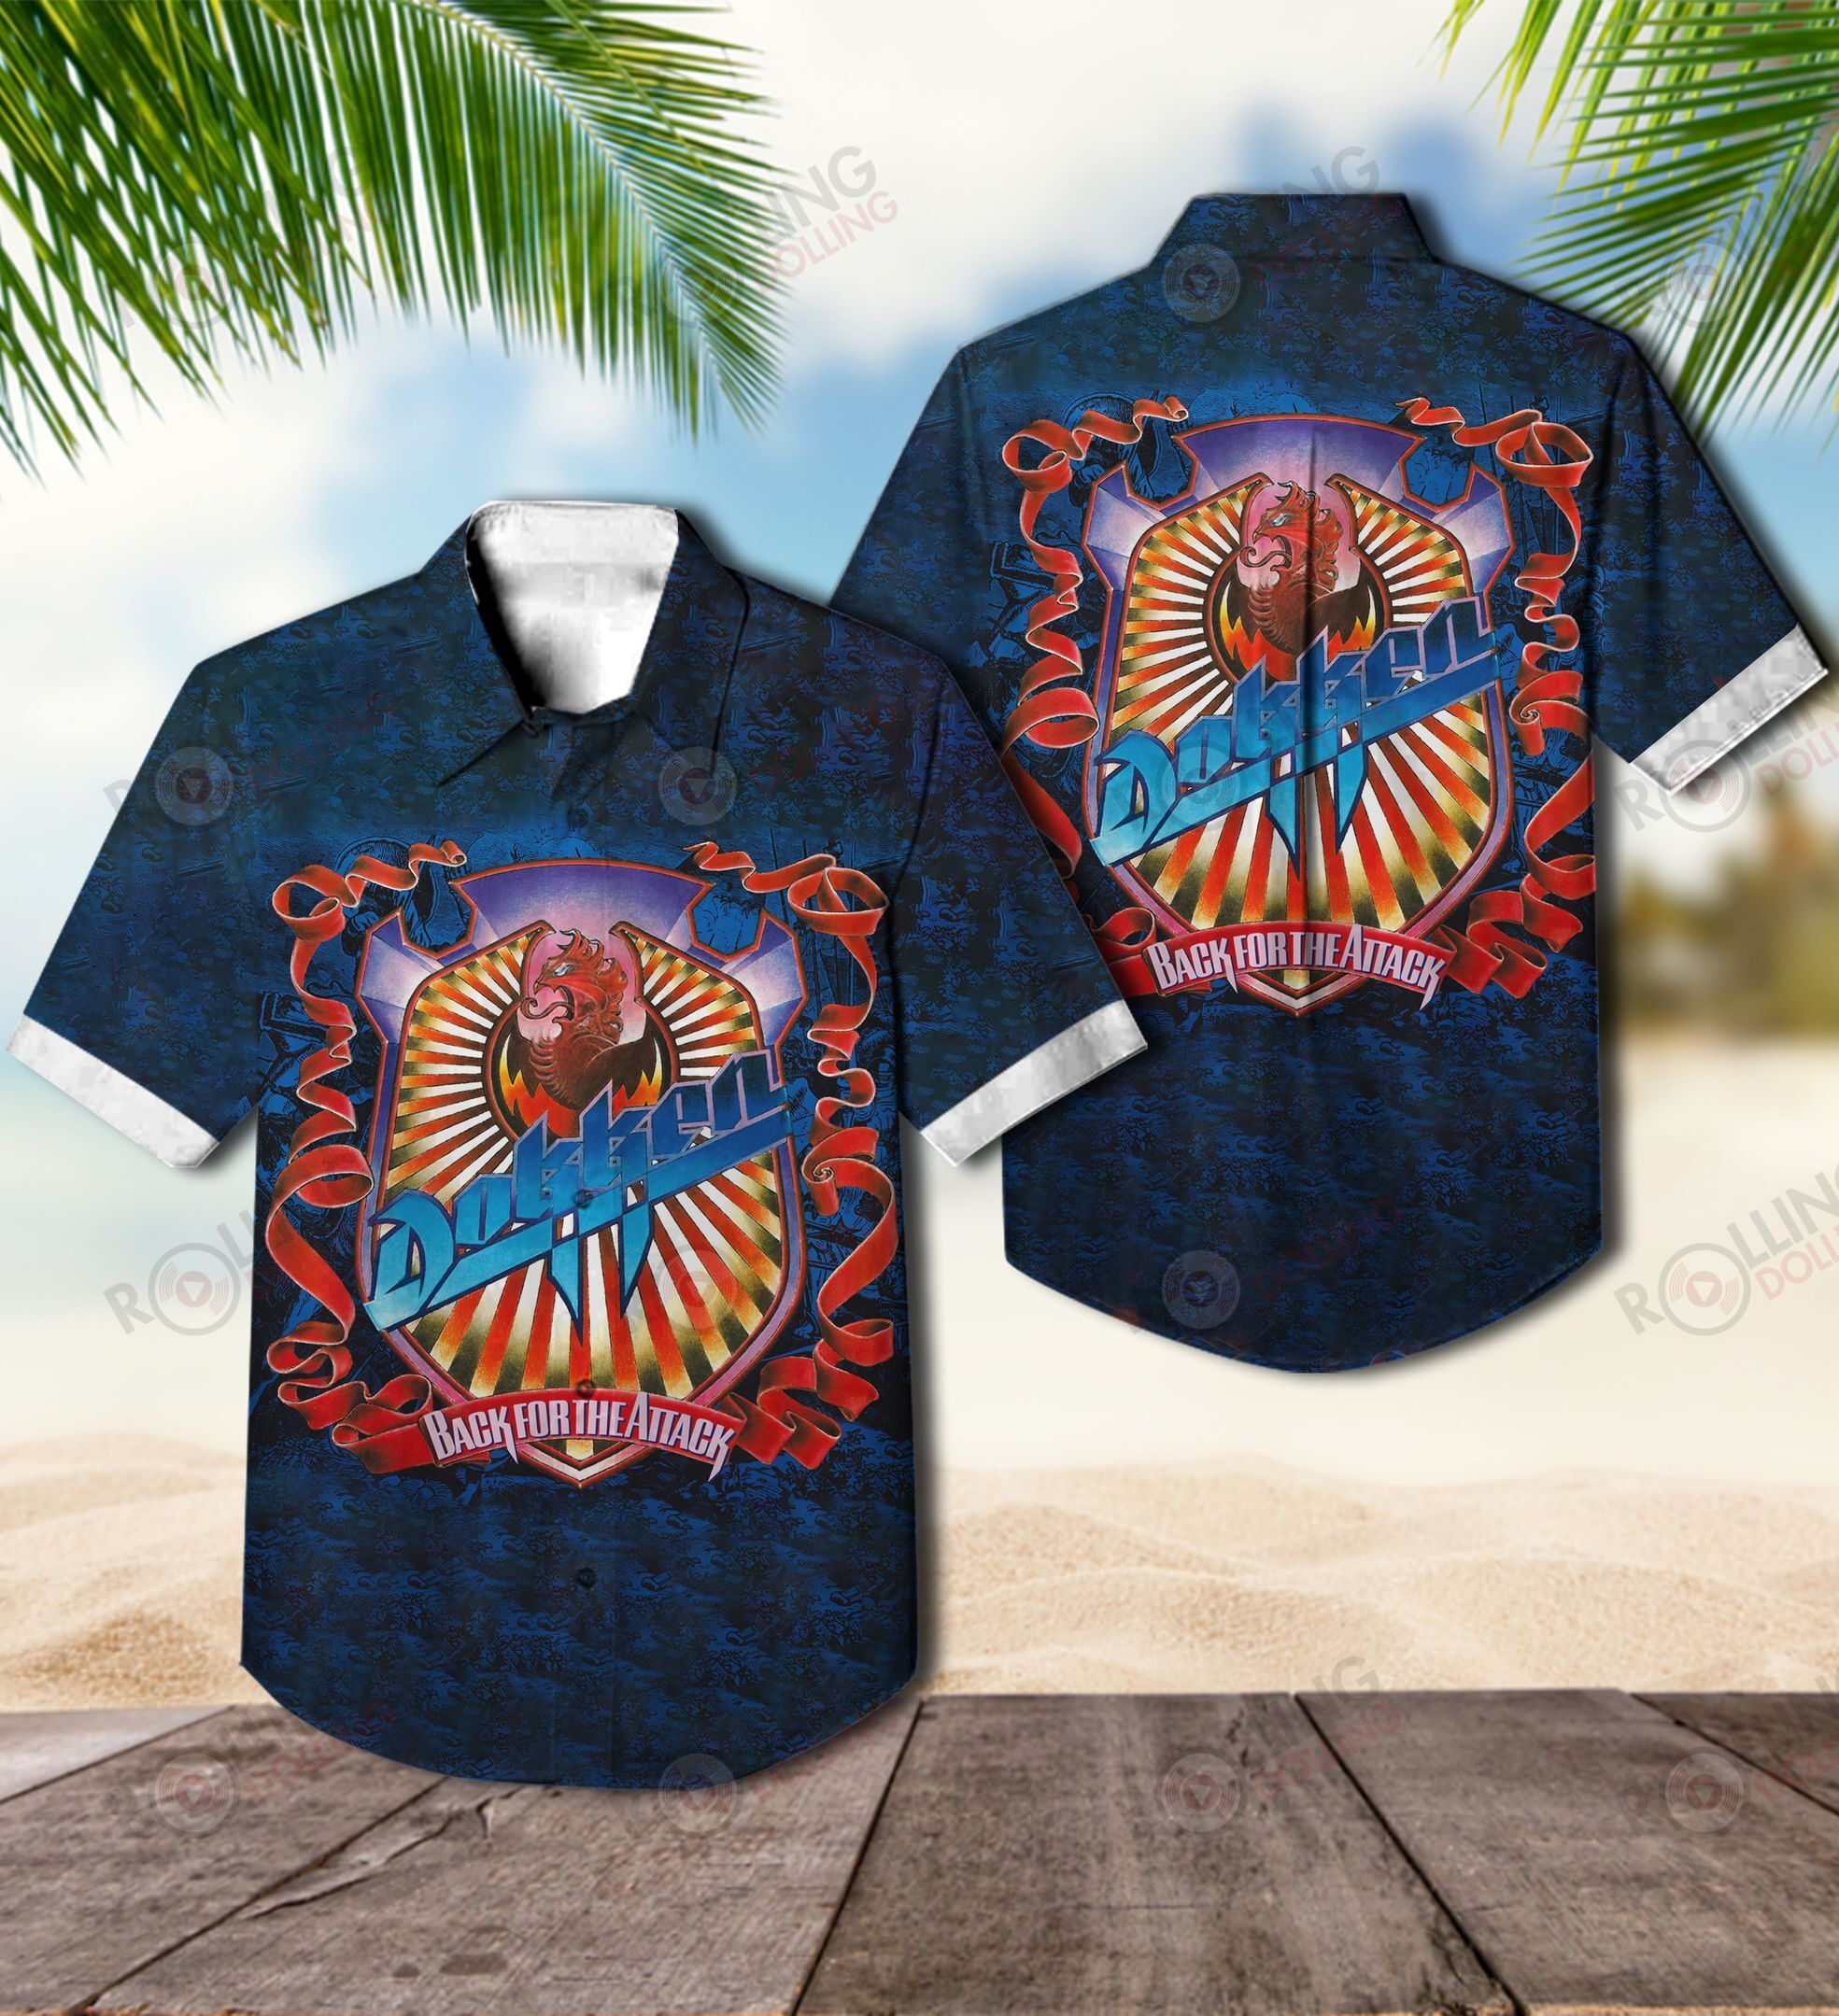 We have compiled a list of some of the best Hawaiian shirt that are available 279